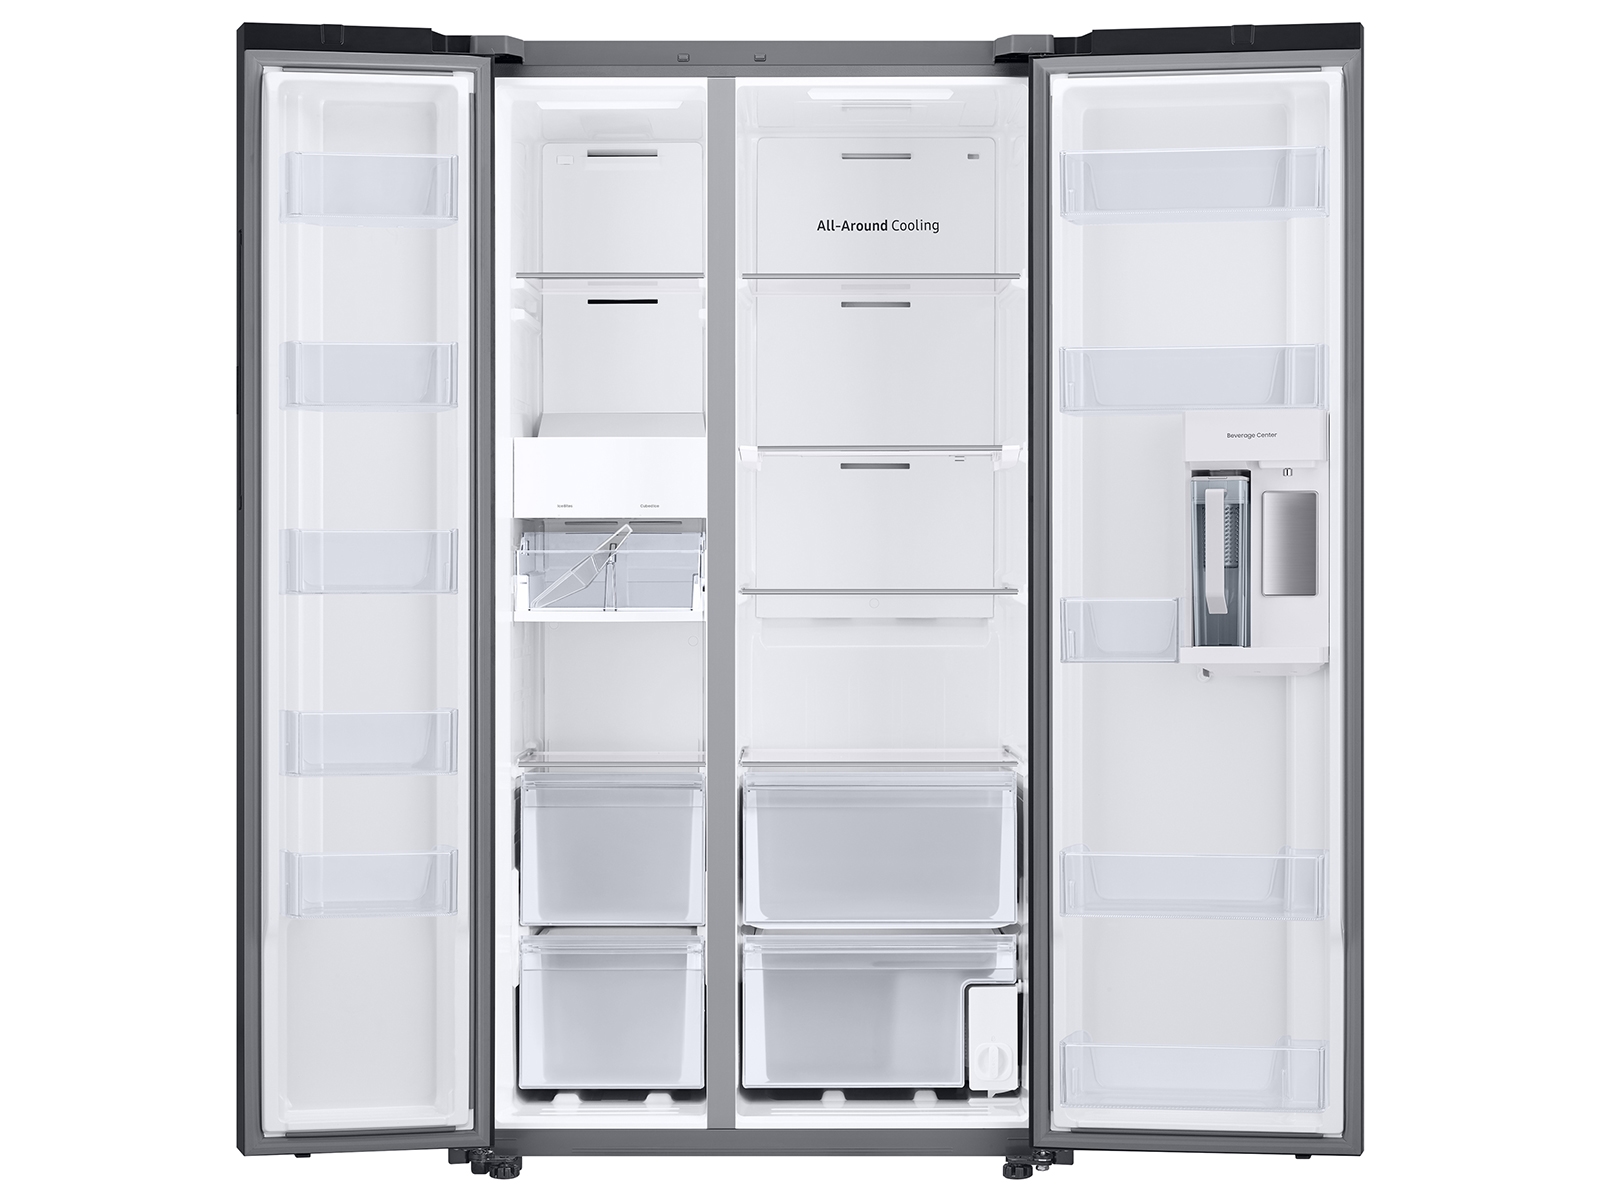 Bespoke 28 cu. ft. Refrigerator with Side-by-side Glass in Beverage Center US | Samsung White